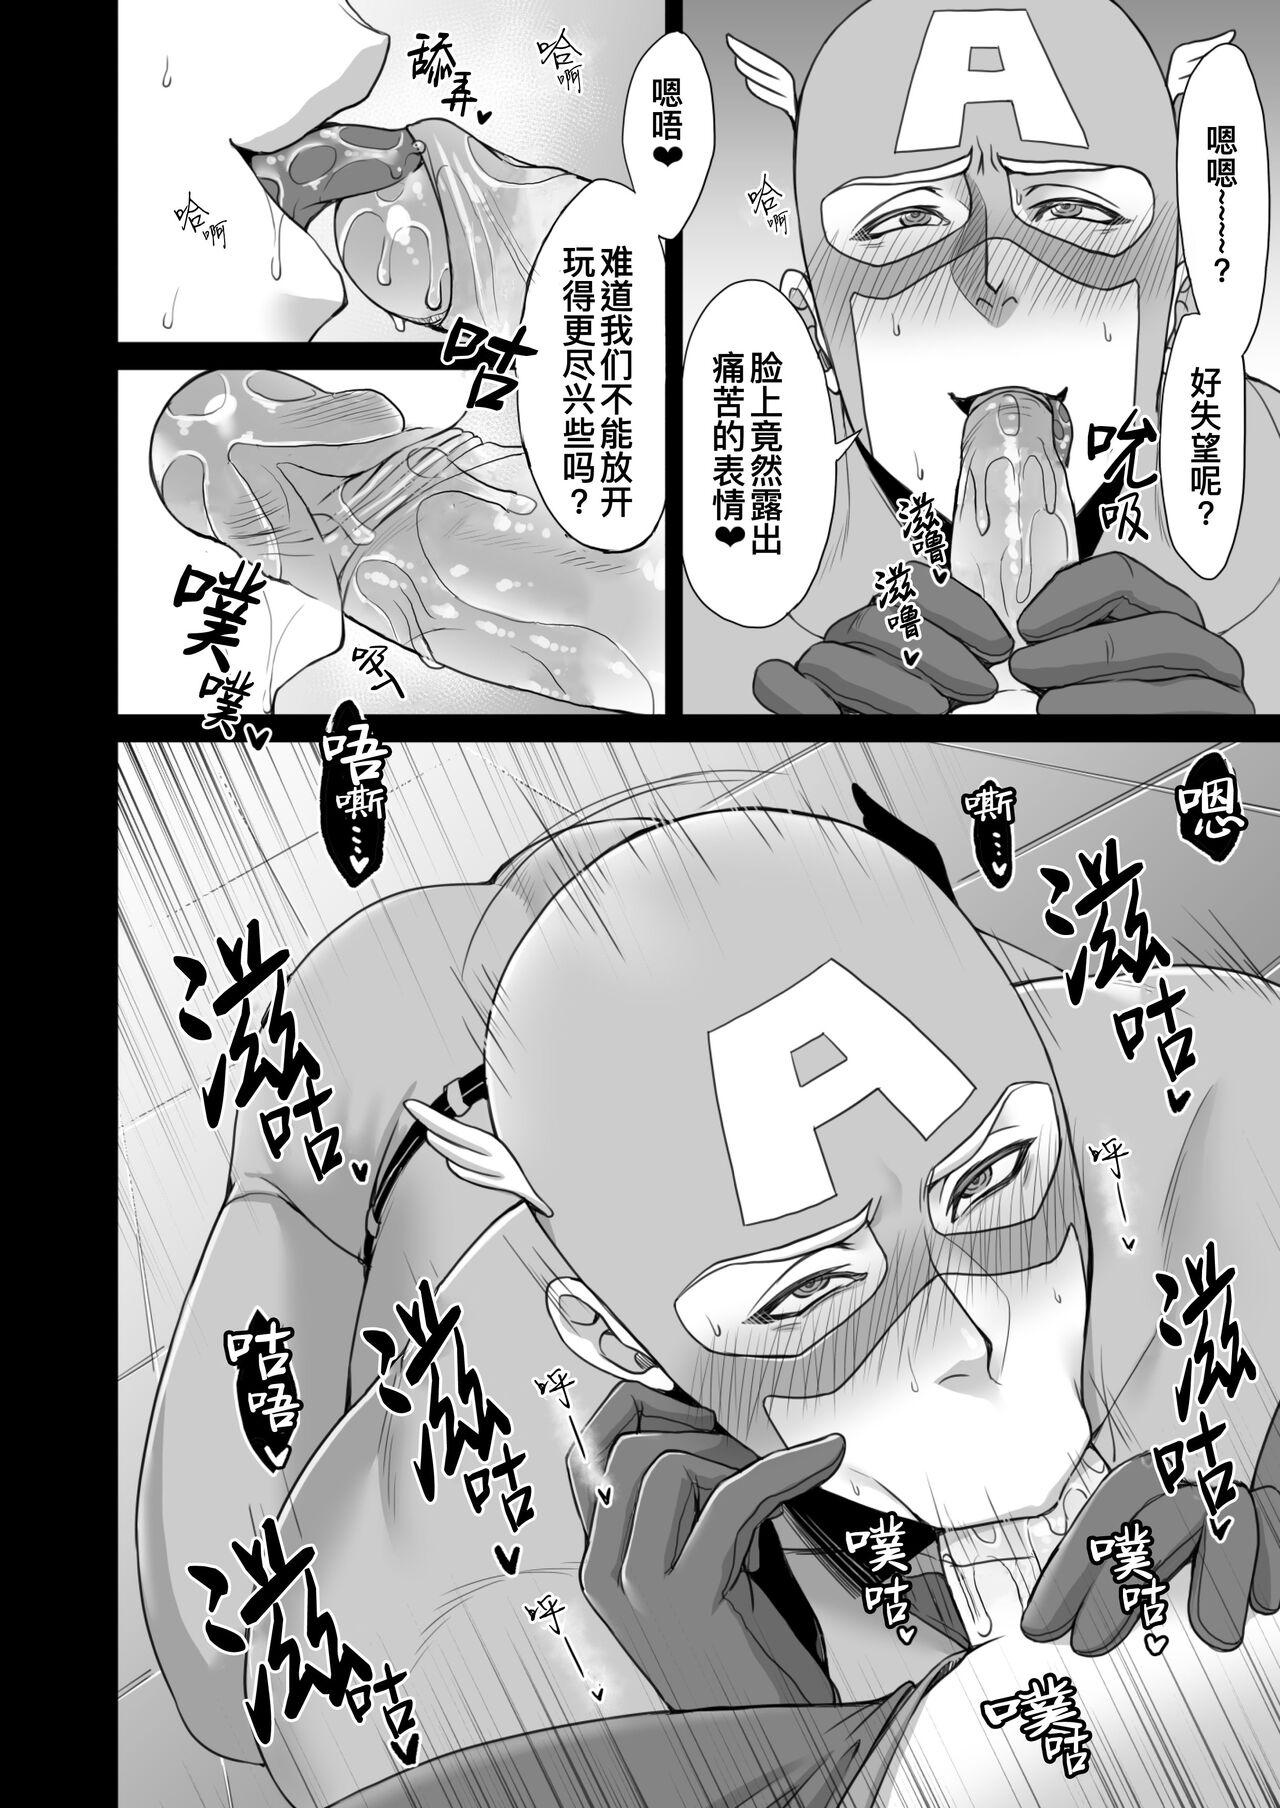 Watersports NO HEROES Our love and hate relationship | 不再需要英雄 - 关于我们之间的爱恨情仇 - Avengers Machine - Page 10